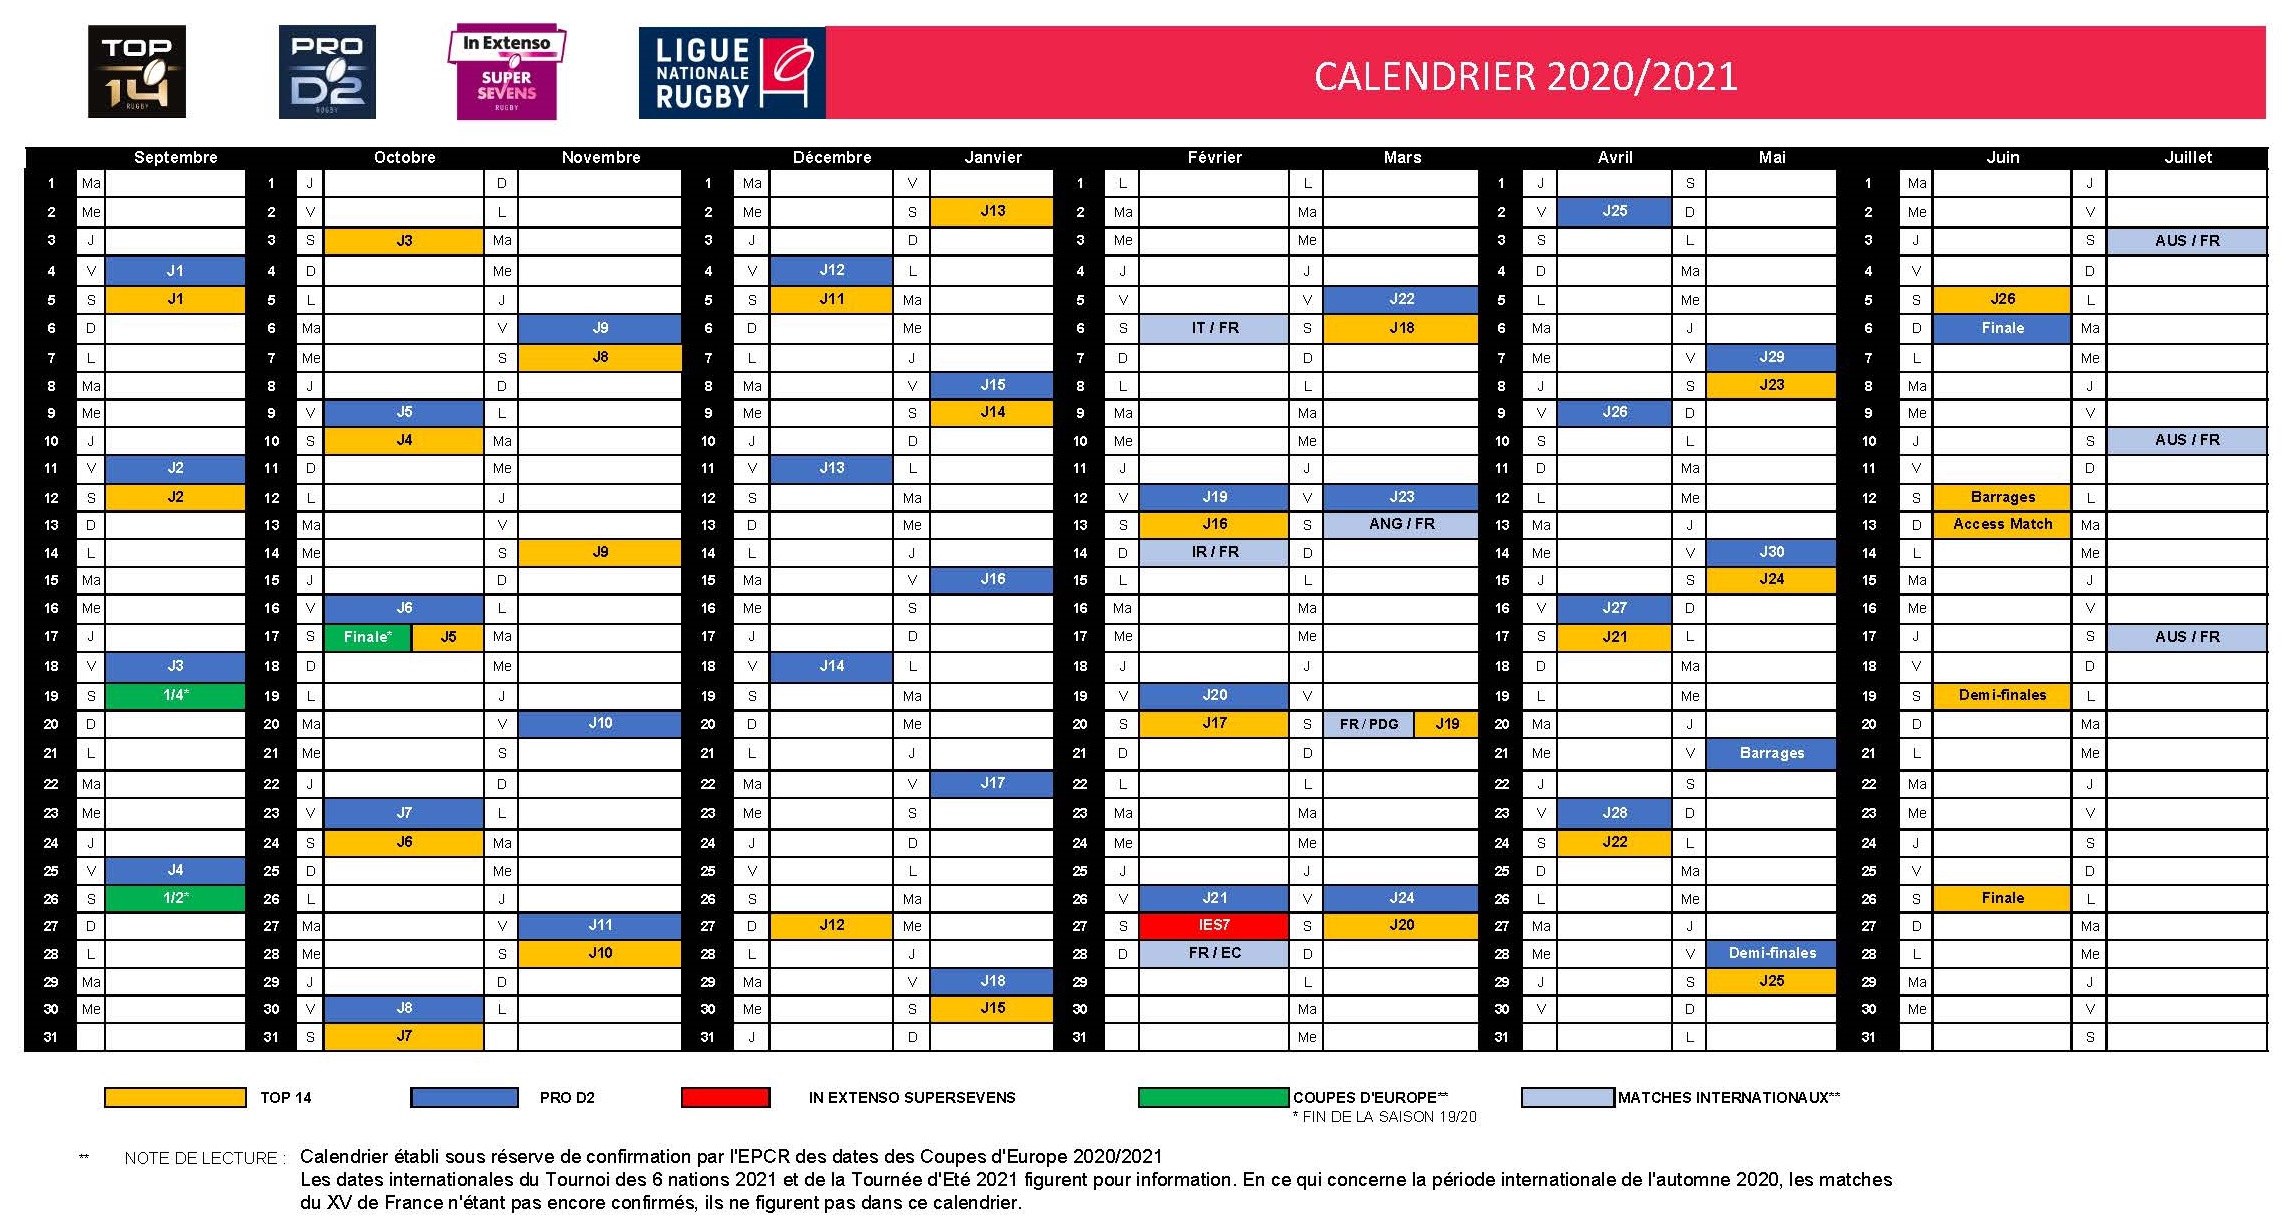 Calendrier Pro D2 2022 2023 2020 2021 Top 14 and Pro D2 provisional calendars   Americas Rugby 